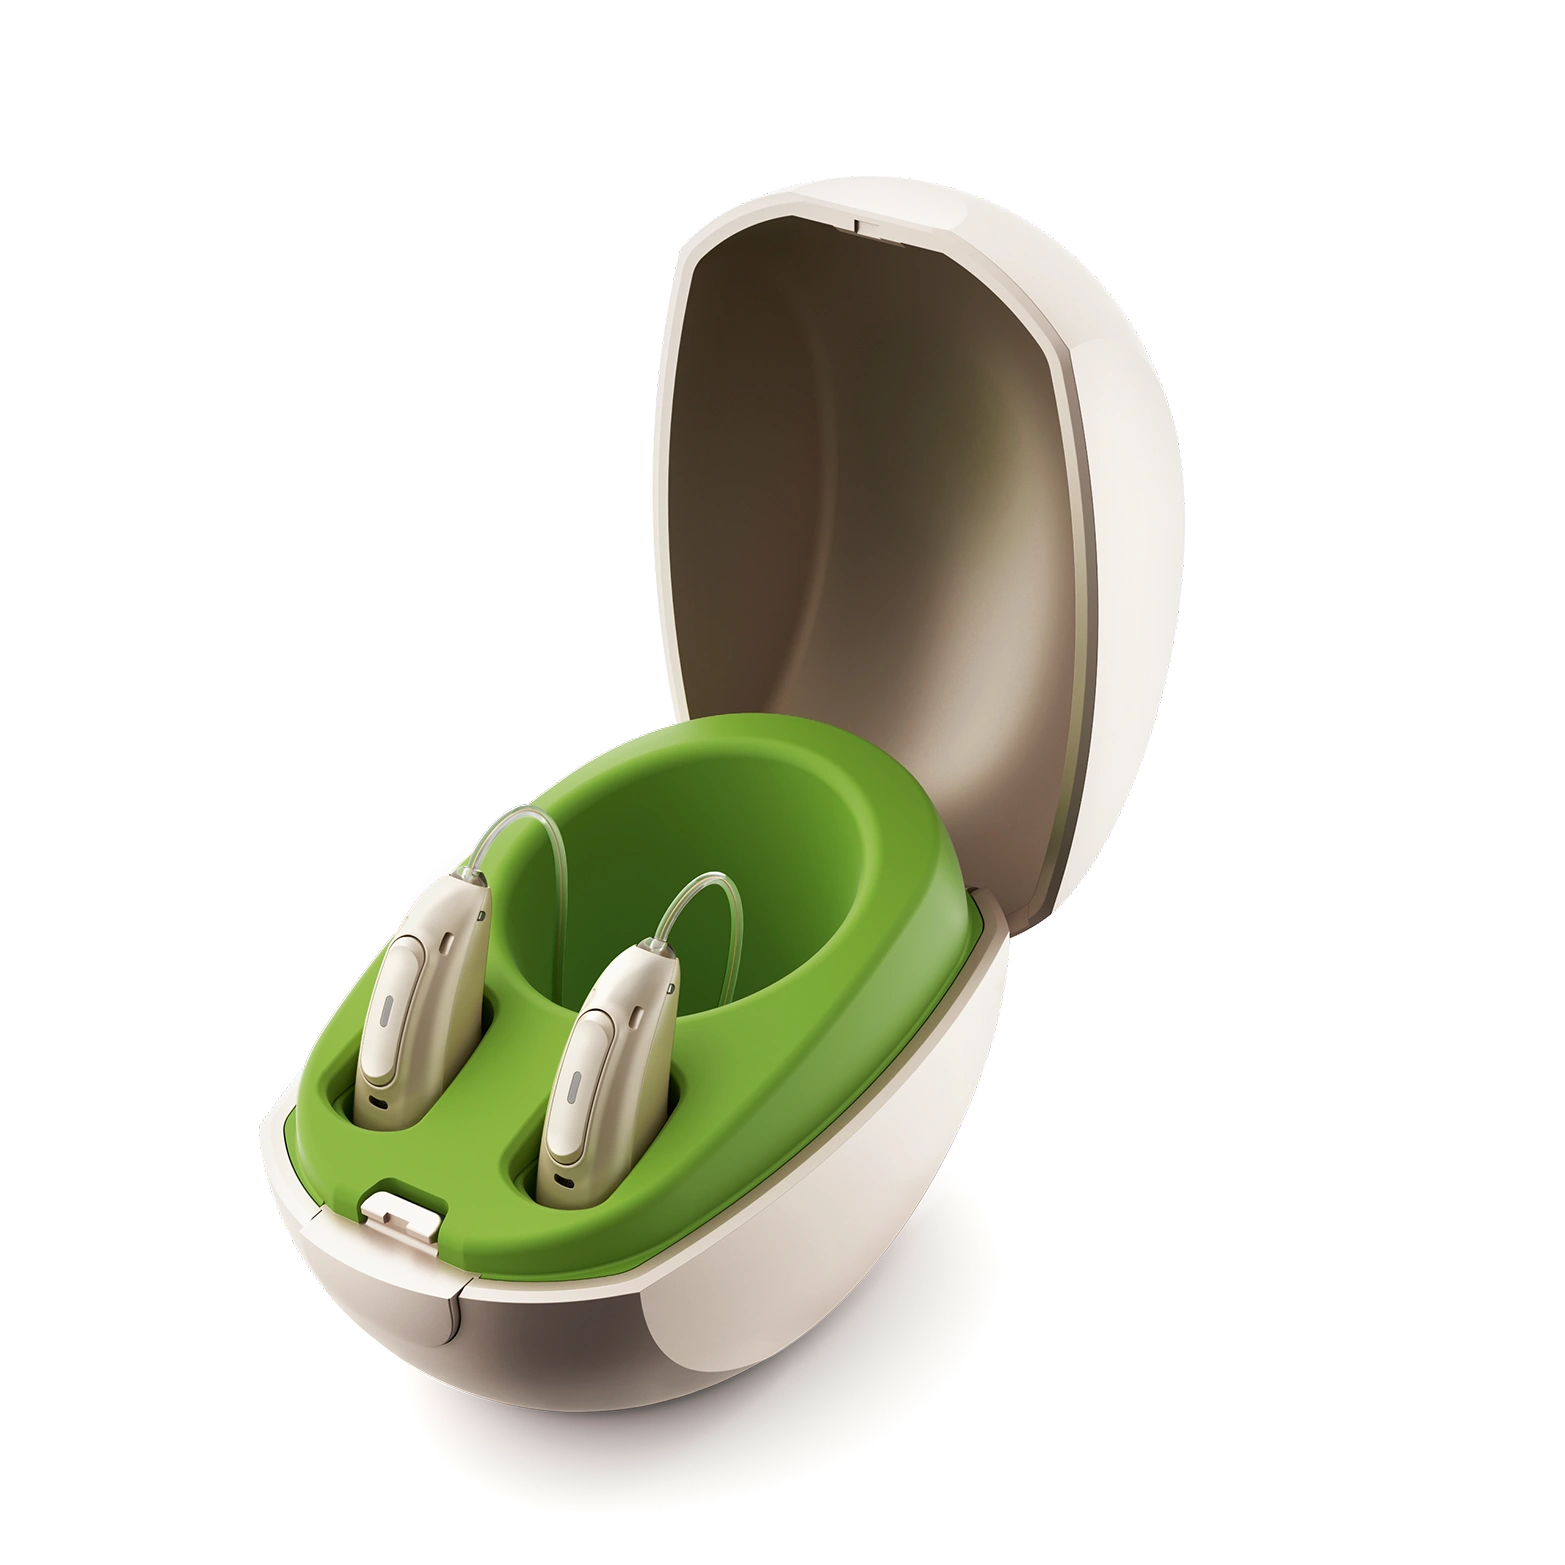 Phonak
rechargeable
hearing aids
receiver in the canal
bluetooth connectivity
discrete
cosmetic